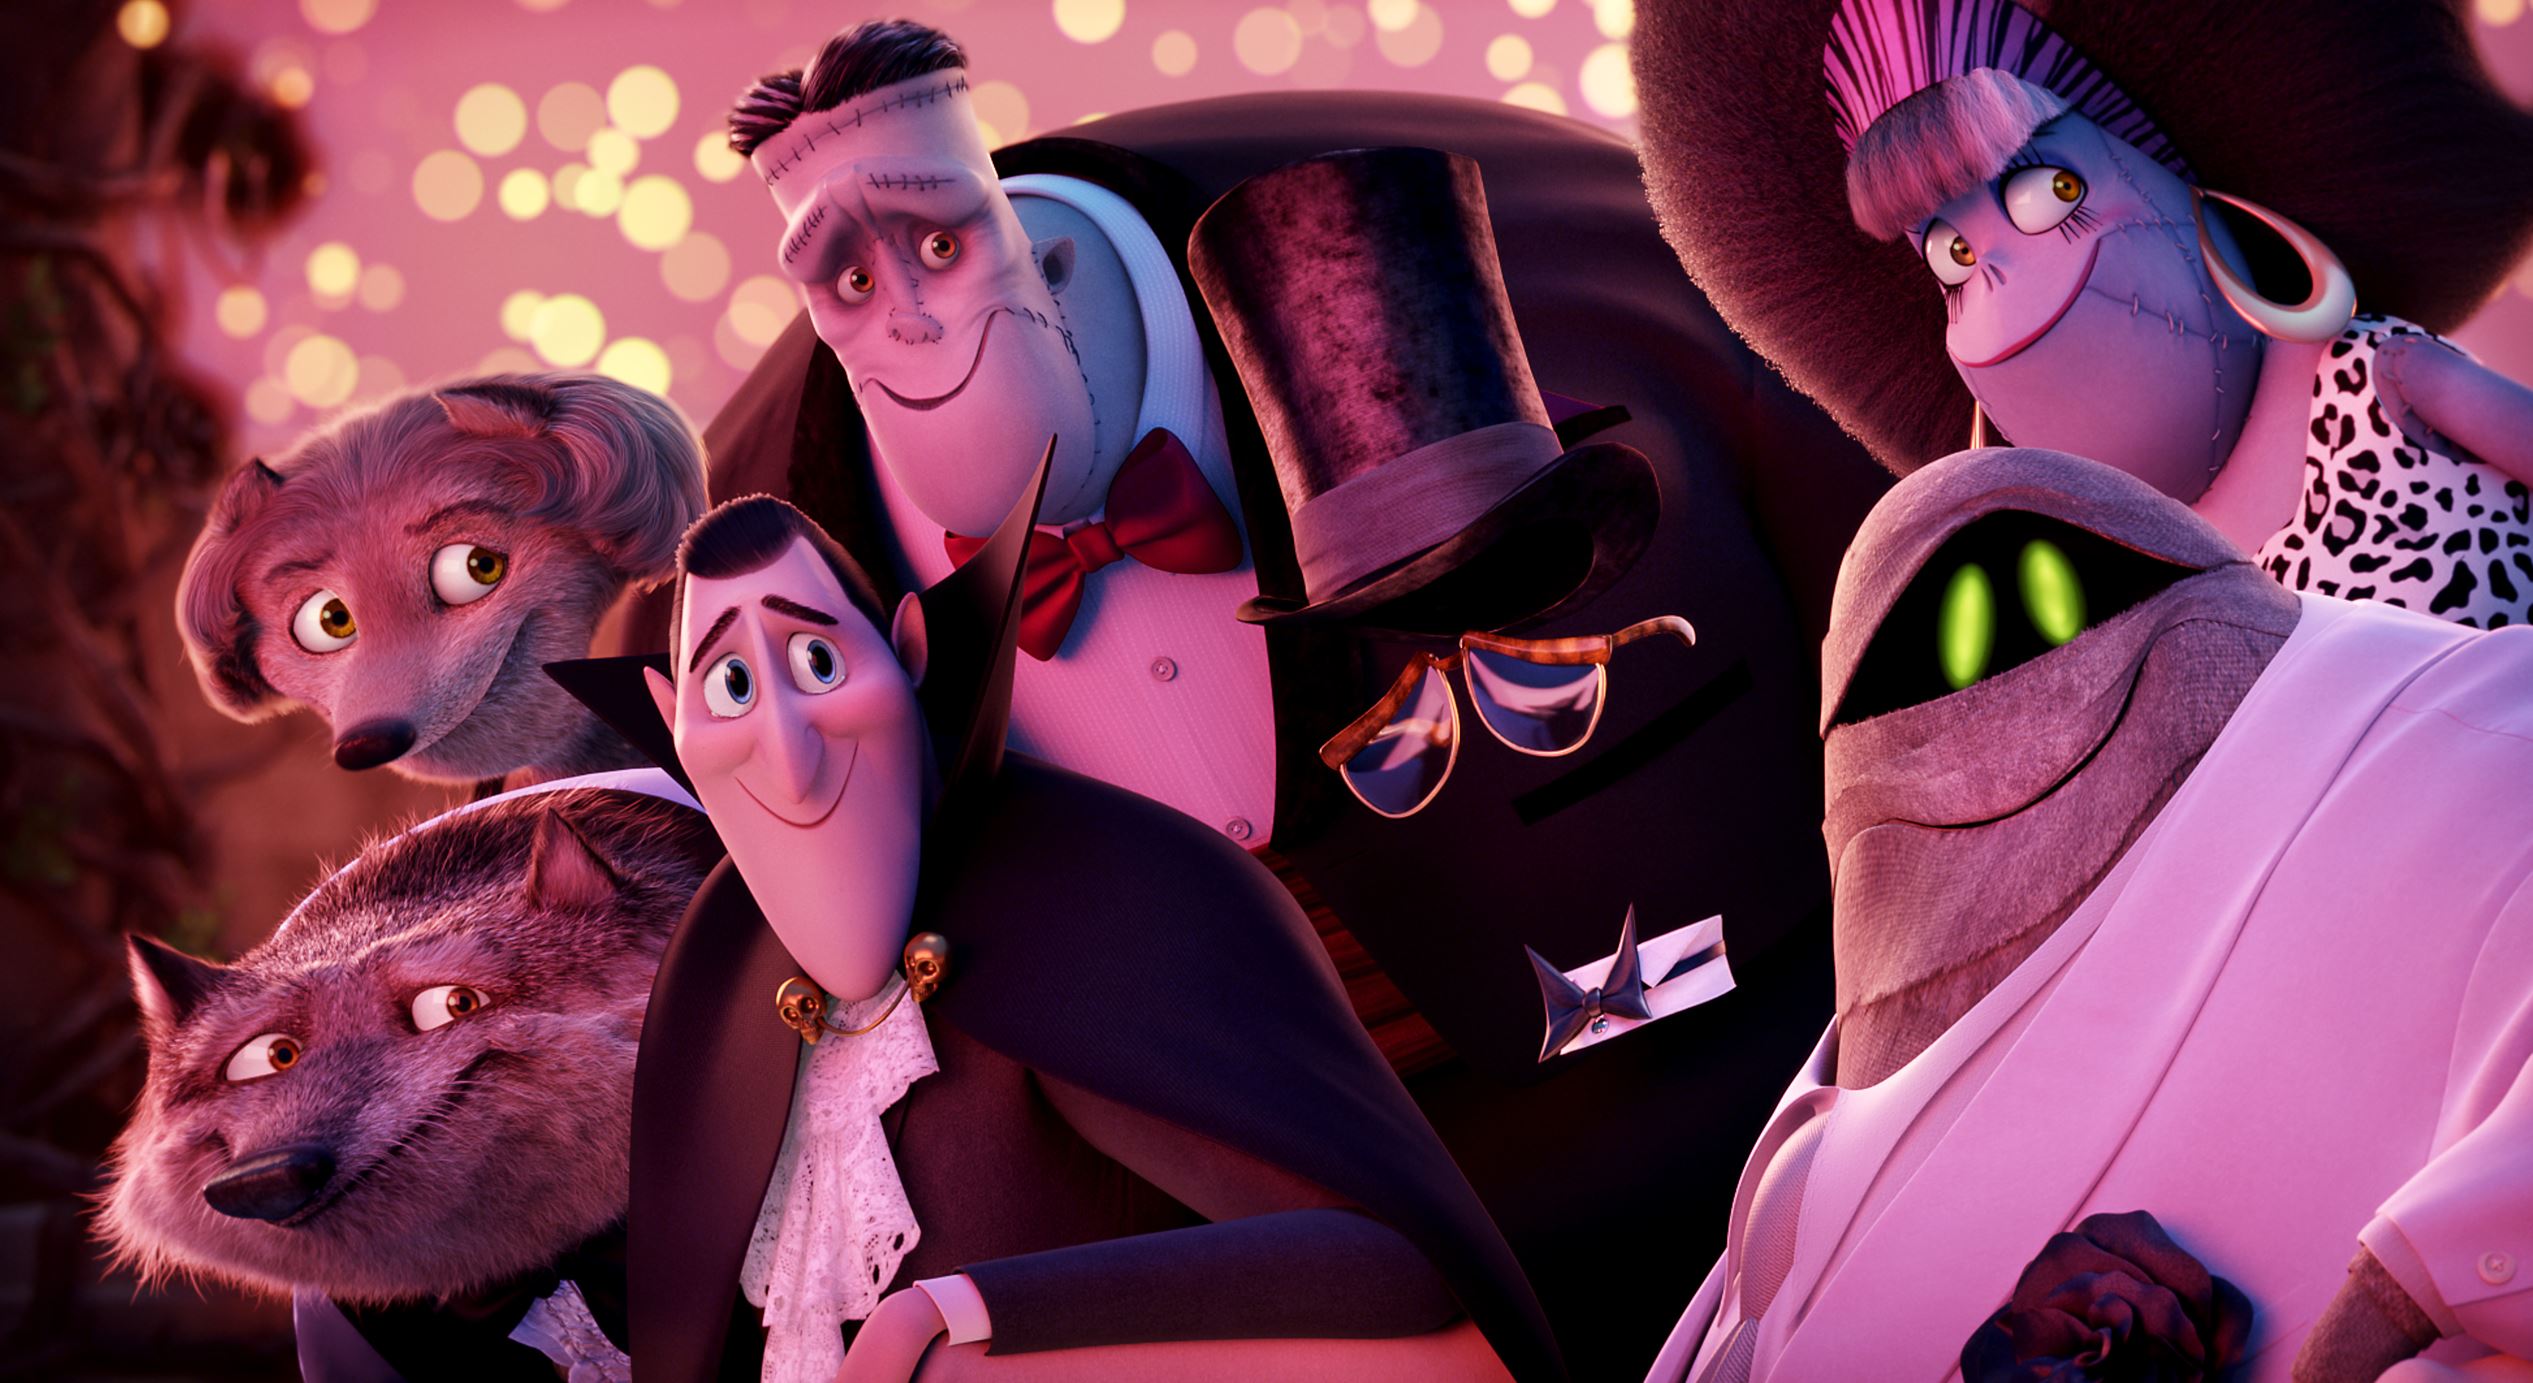 Hotel Transylvania 2 Wallpapers, Pictures, Images